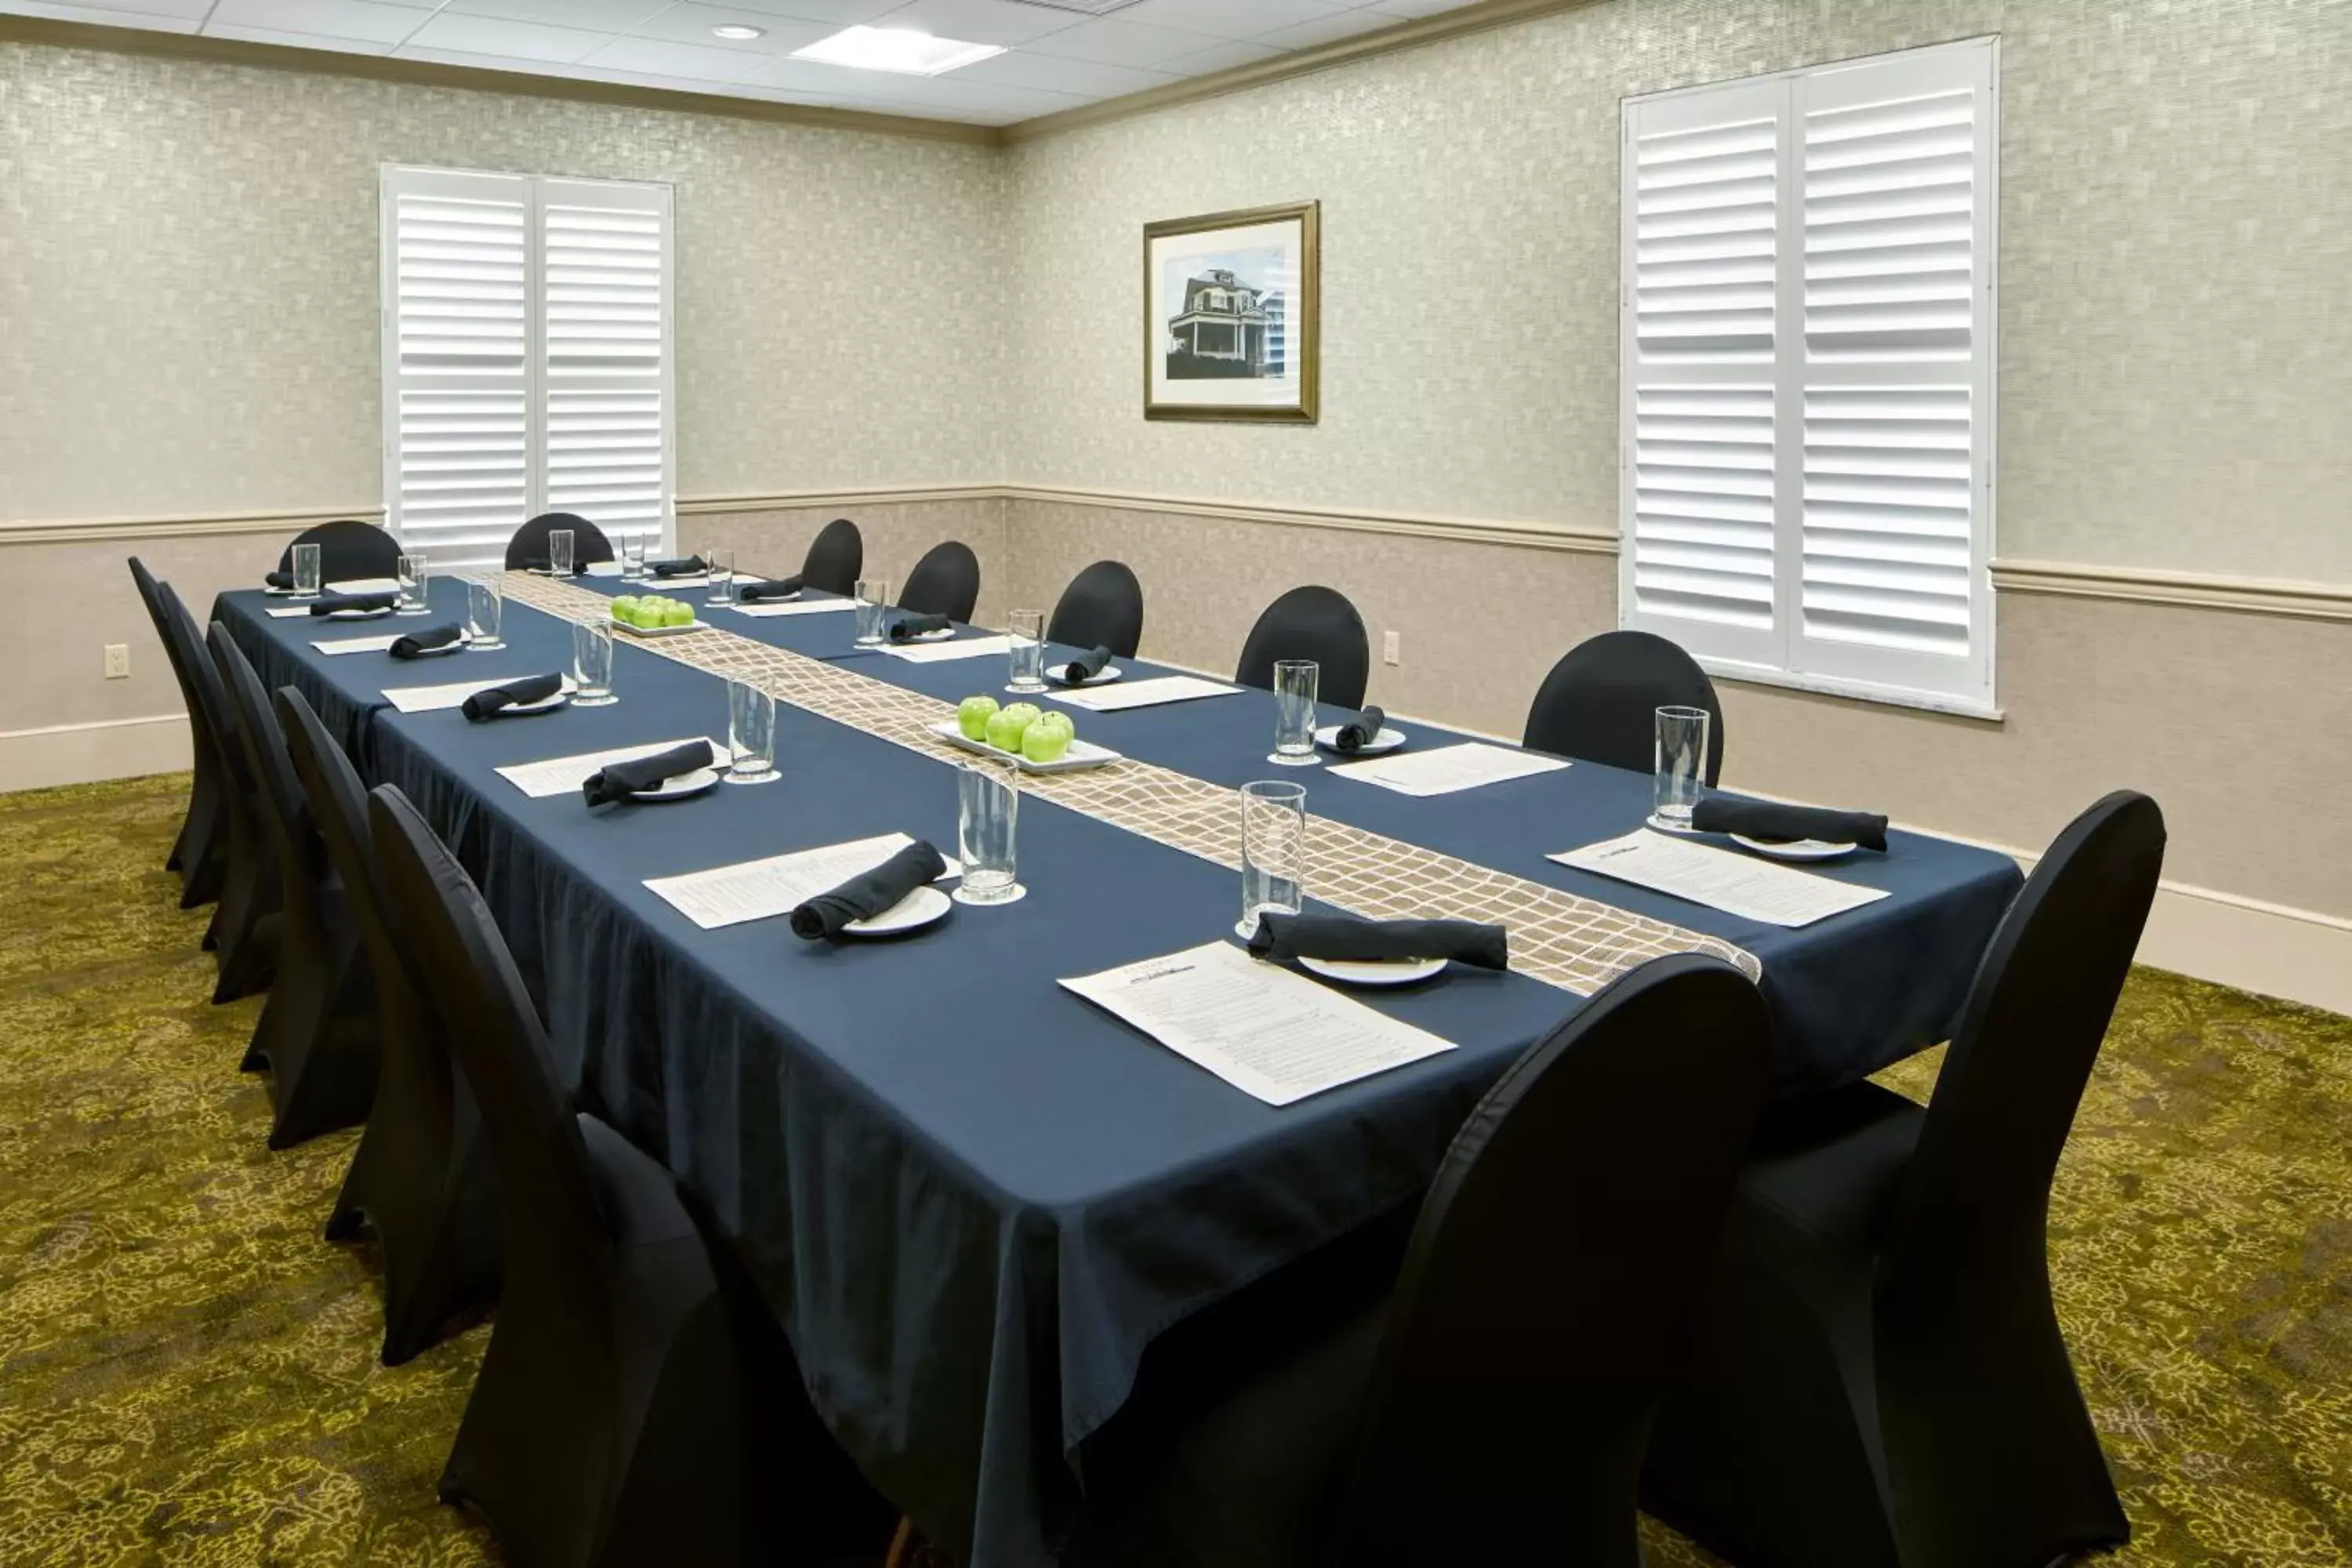 Meeting/conference room in Ohio University Inn and Conference Center